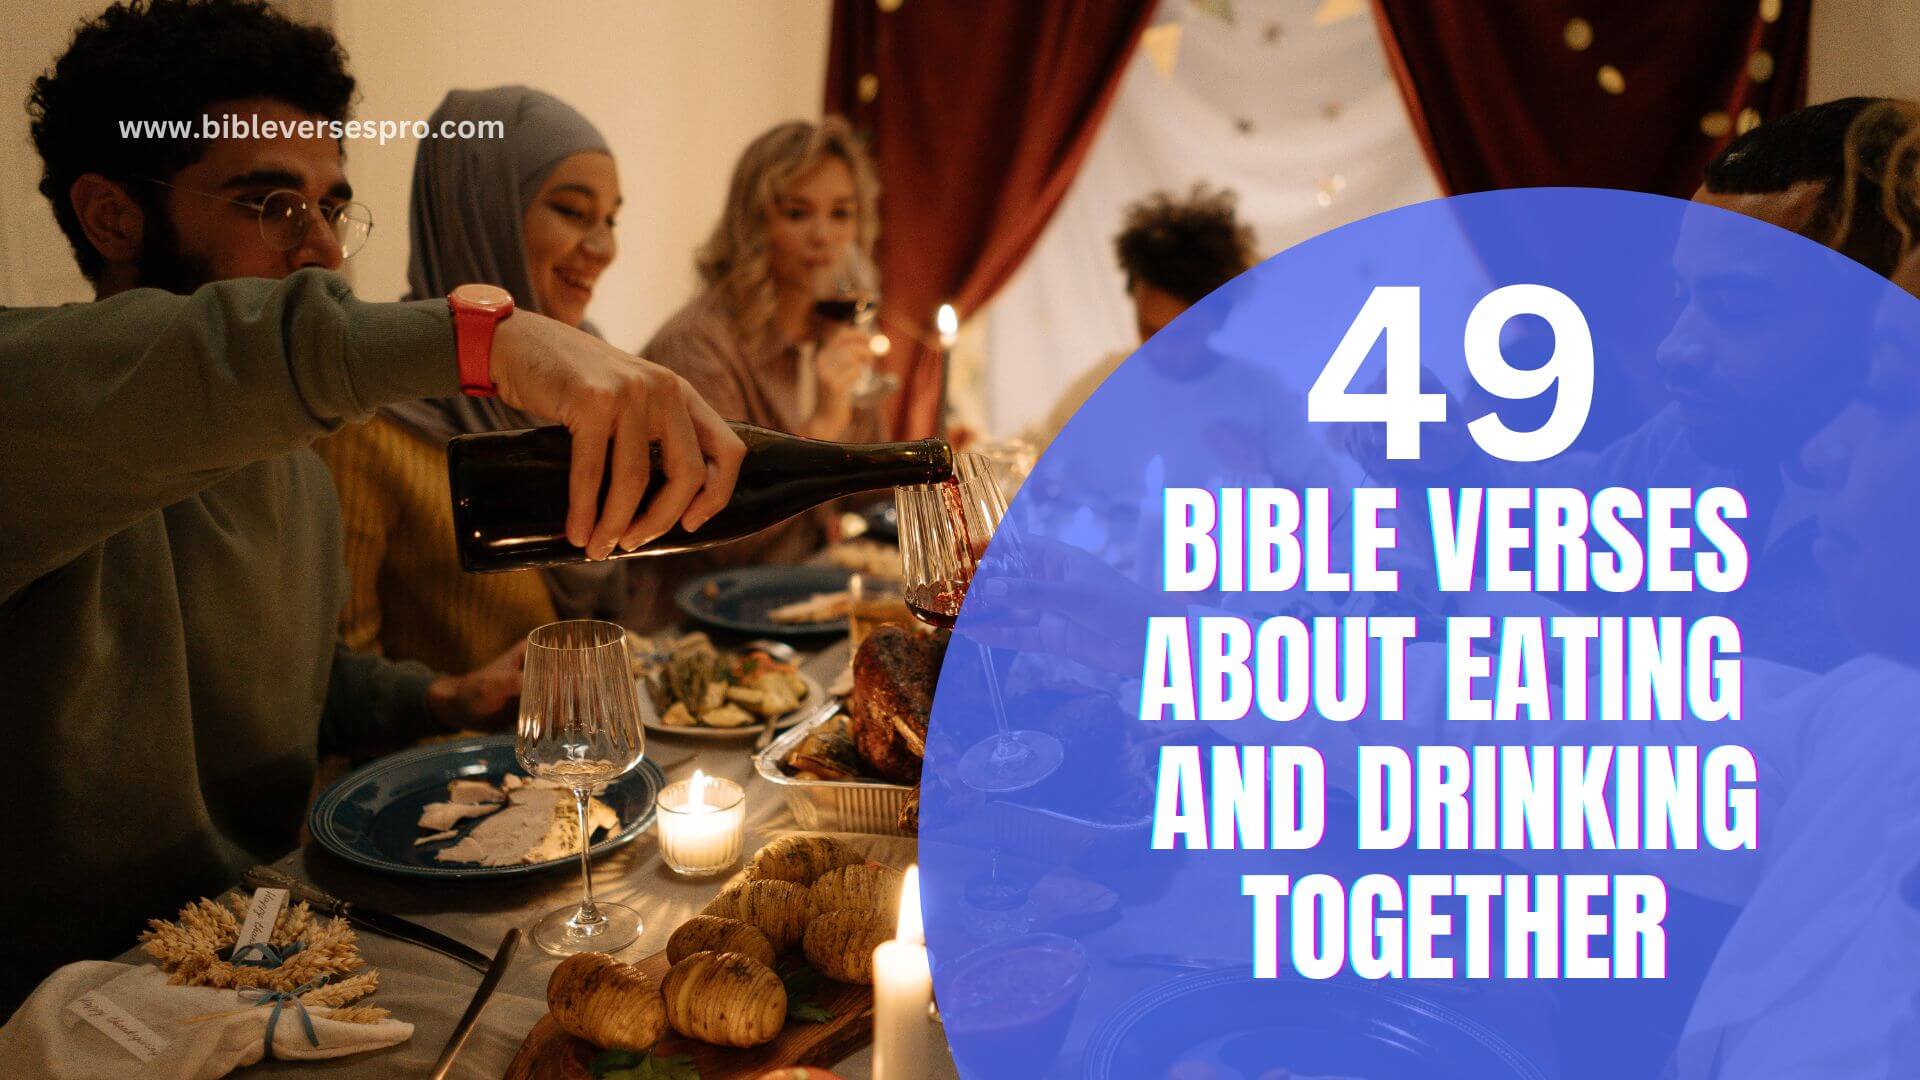 Bible Verse About Eating And Drinking Together (1)